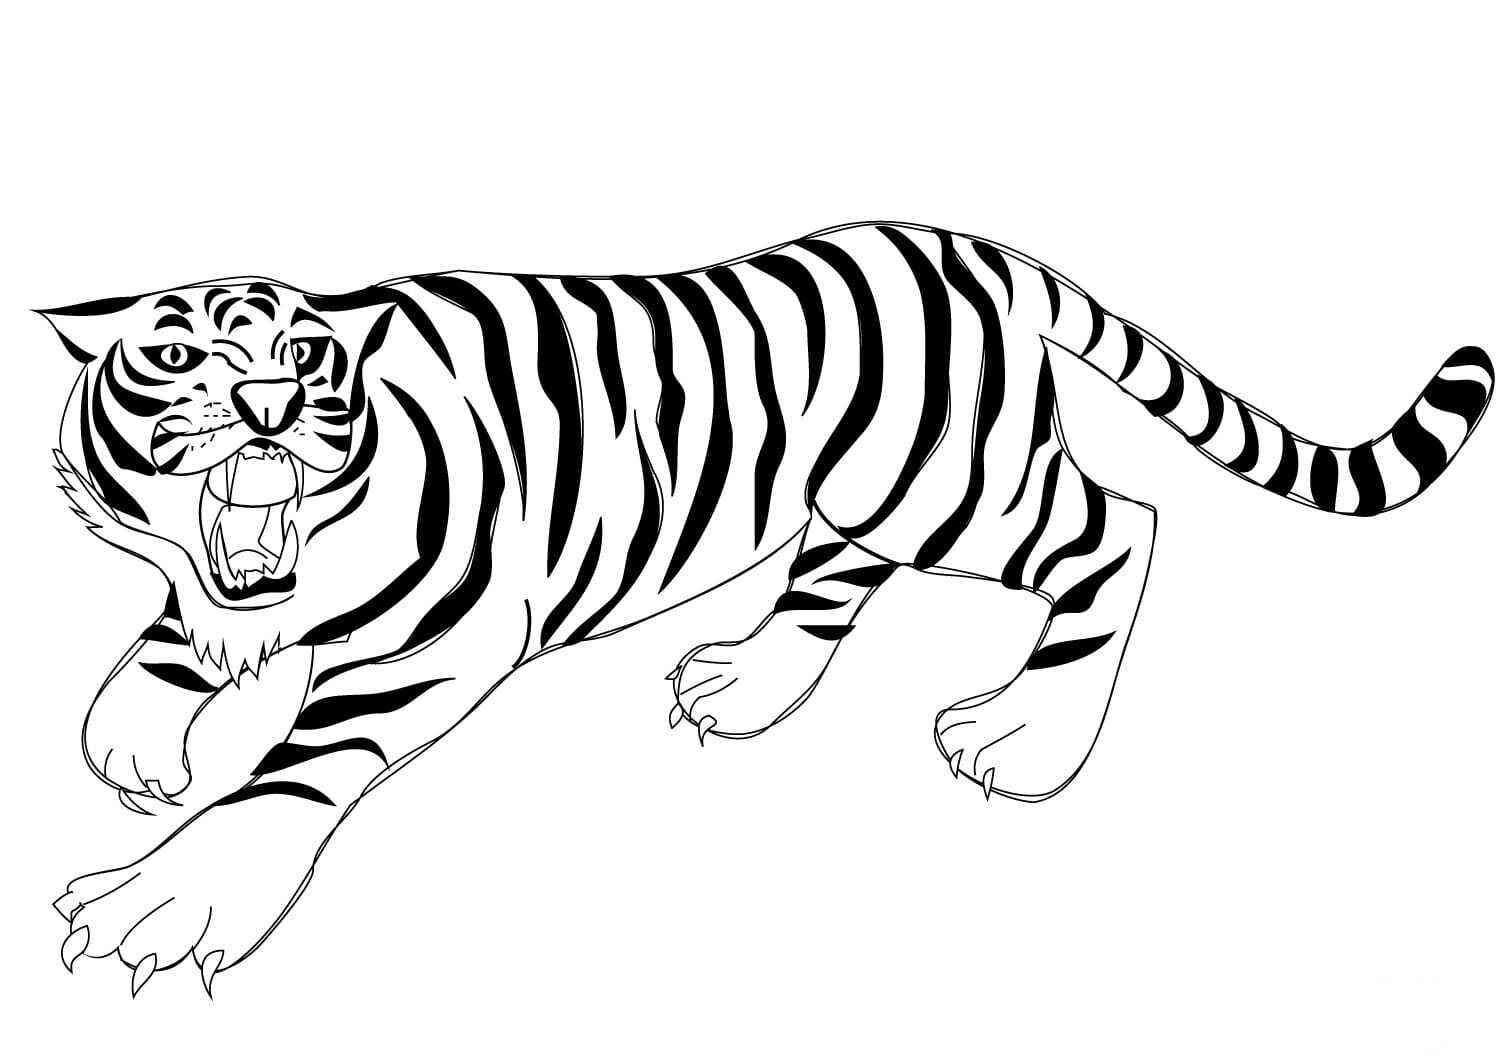 The Tiger Looks So Ferocious Coloring Pages